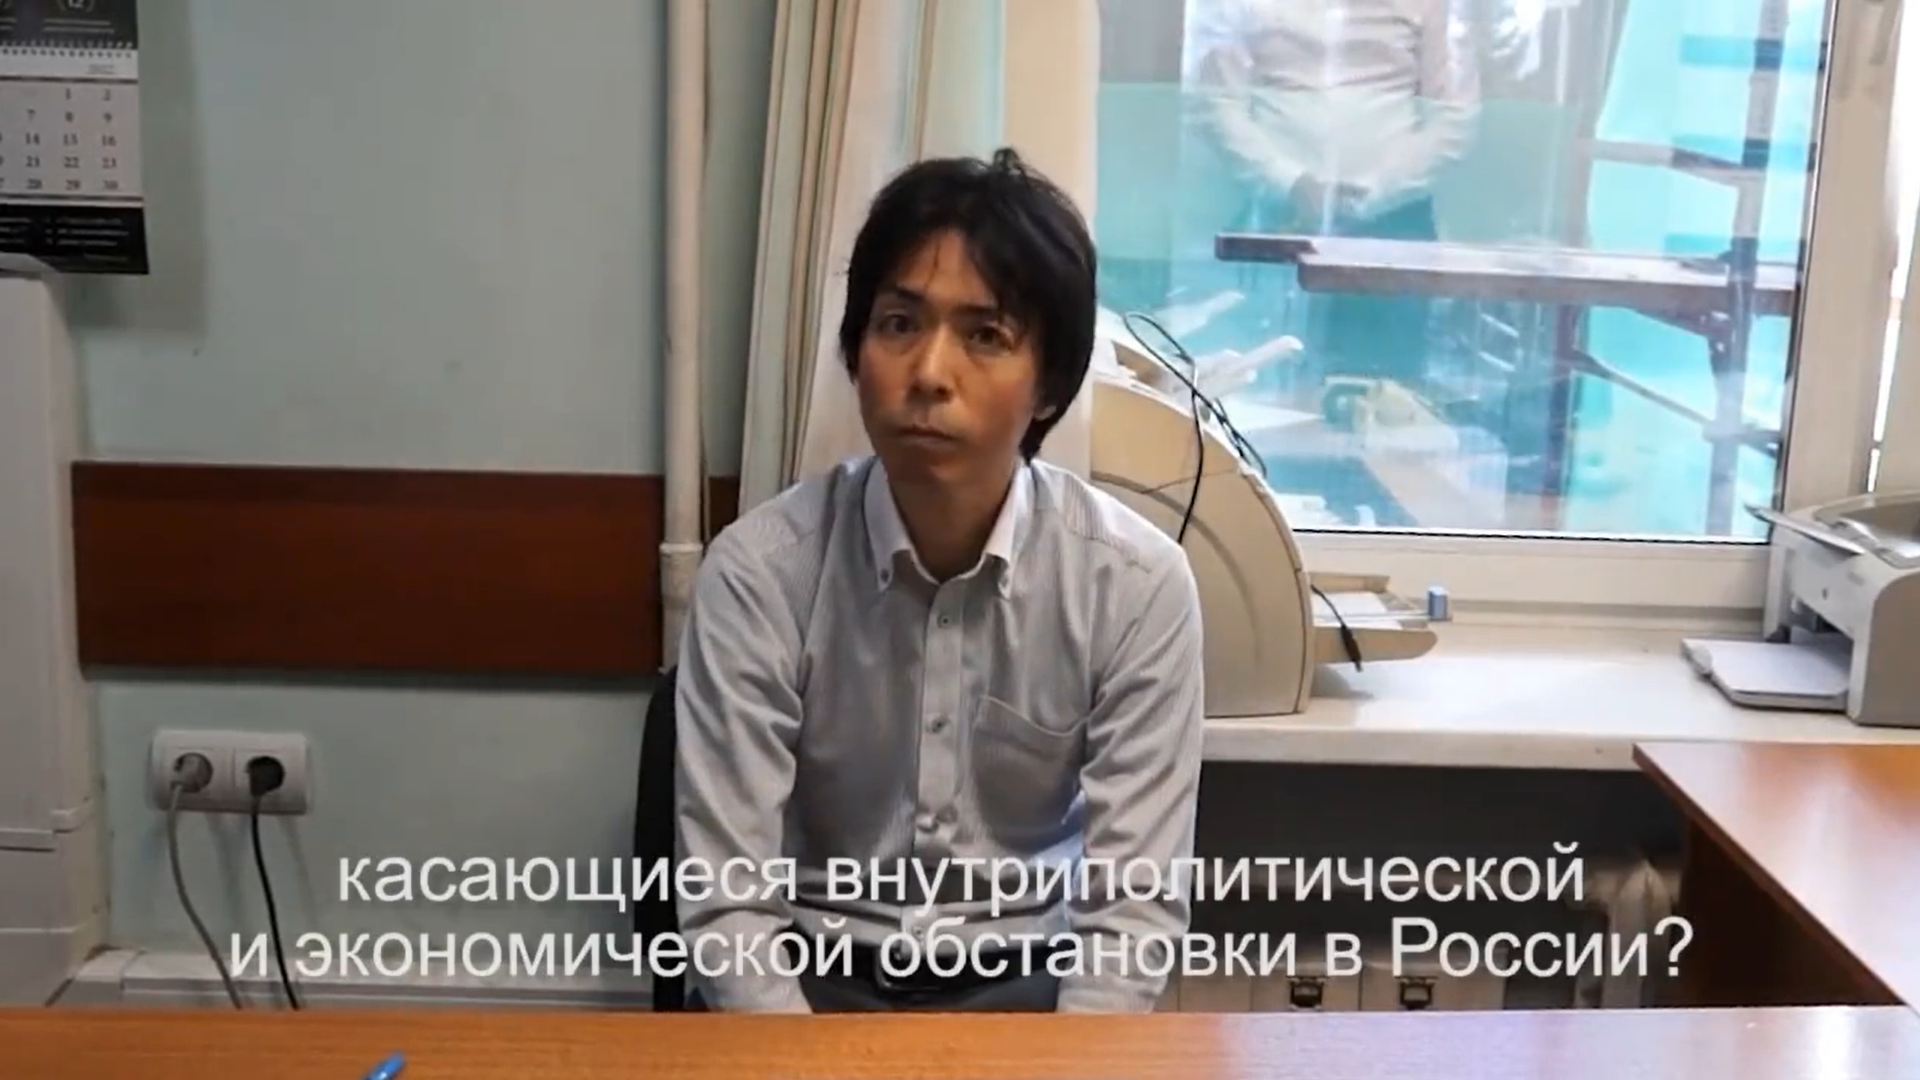 Japanese consul being interrogated by Russian authorities after he was detained over espionage allegations